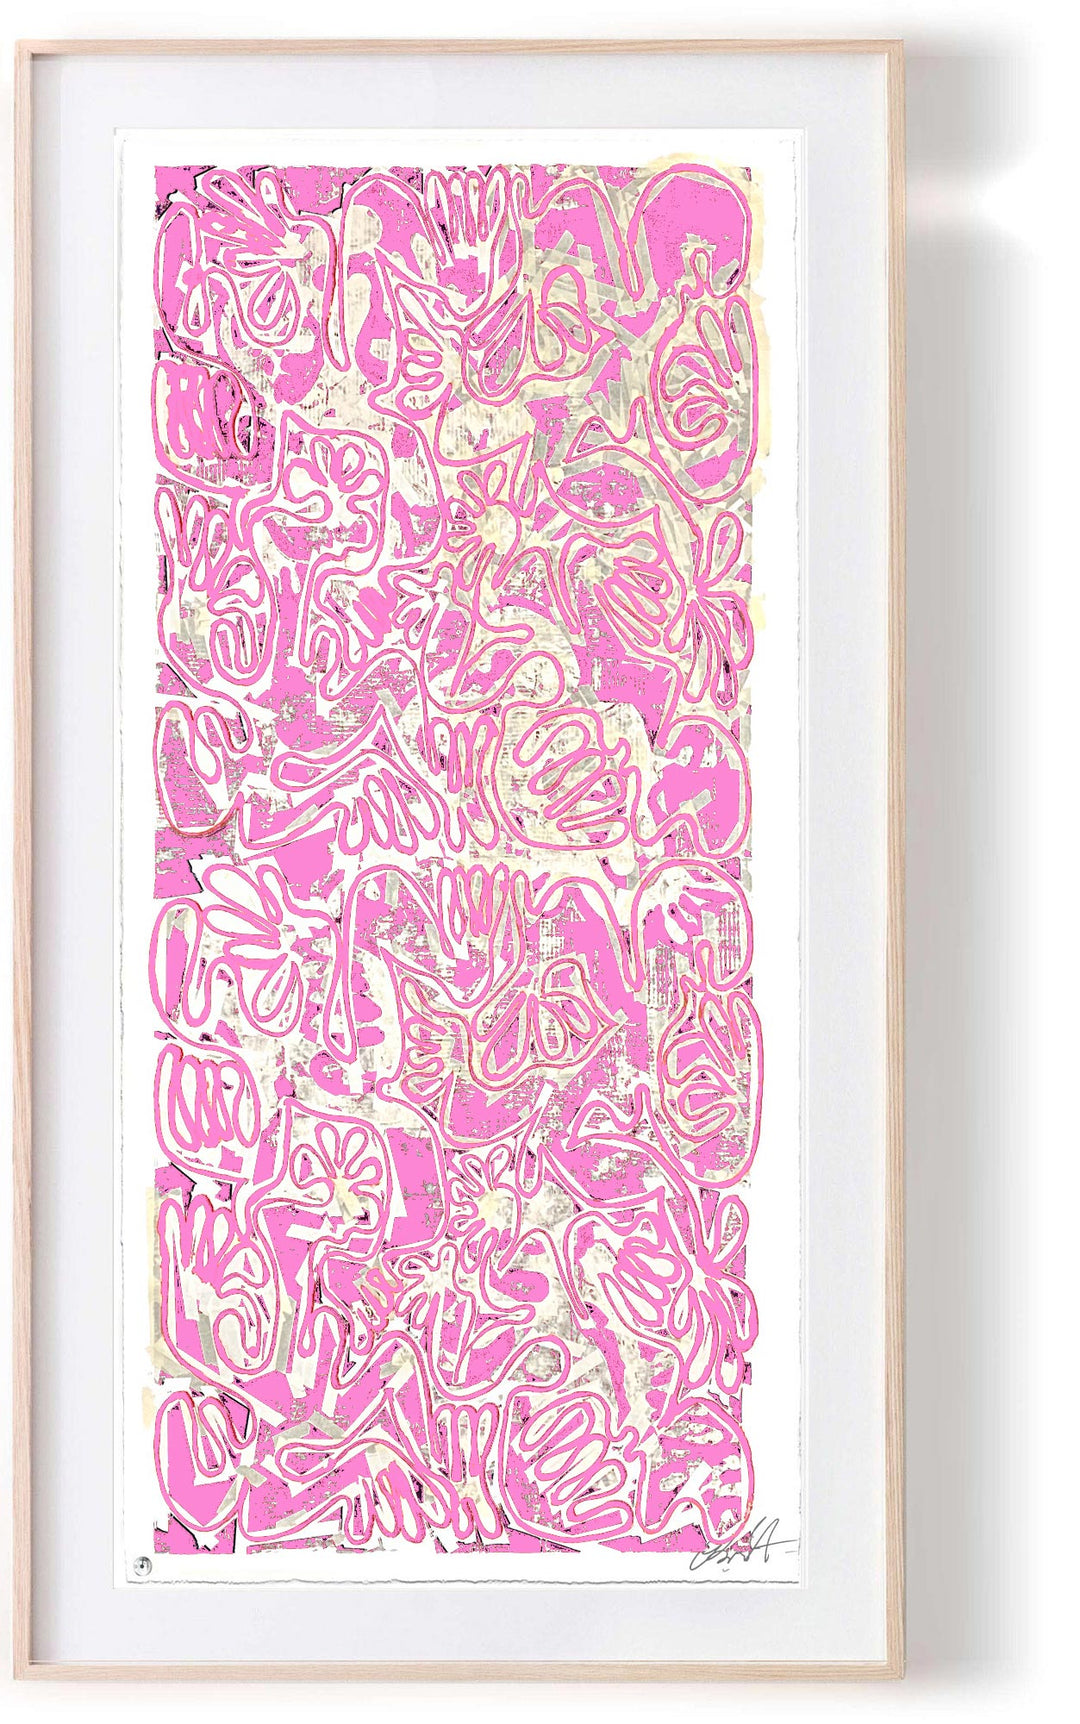 "COVID CHAOS Covid Bazooka Bubblegum Pink No 1" by Robert Santore ©2021. Framed, Hand painted artist silkscreen print, hand printed on the finest archival cold press cotton rag paper with hand torn edges. Painted in the Texas studio.